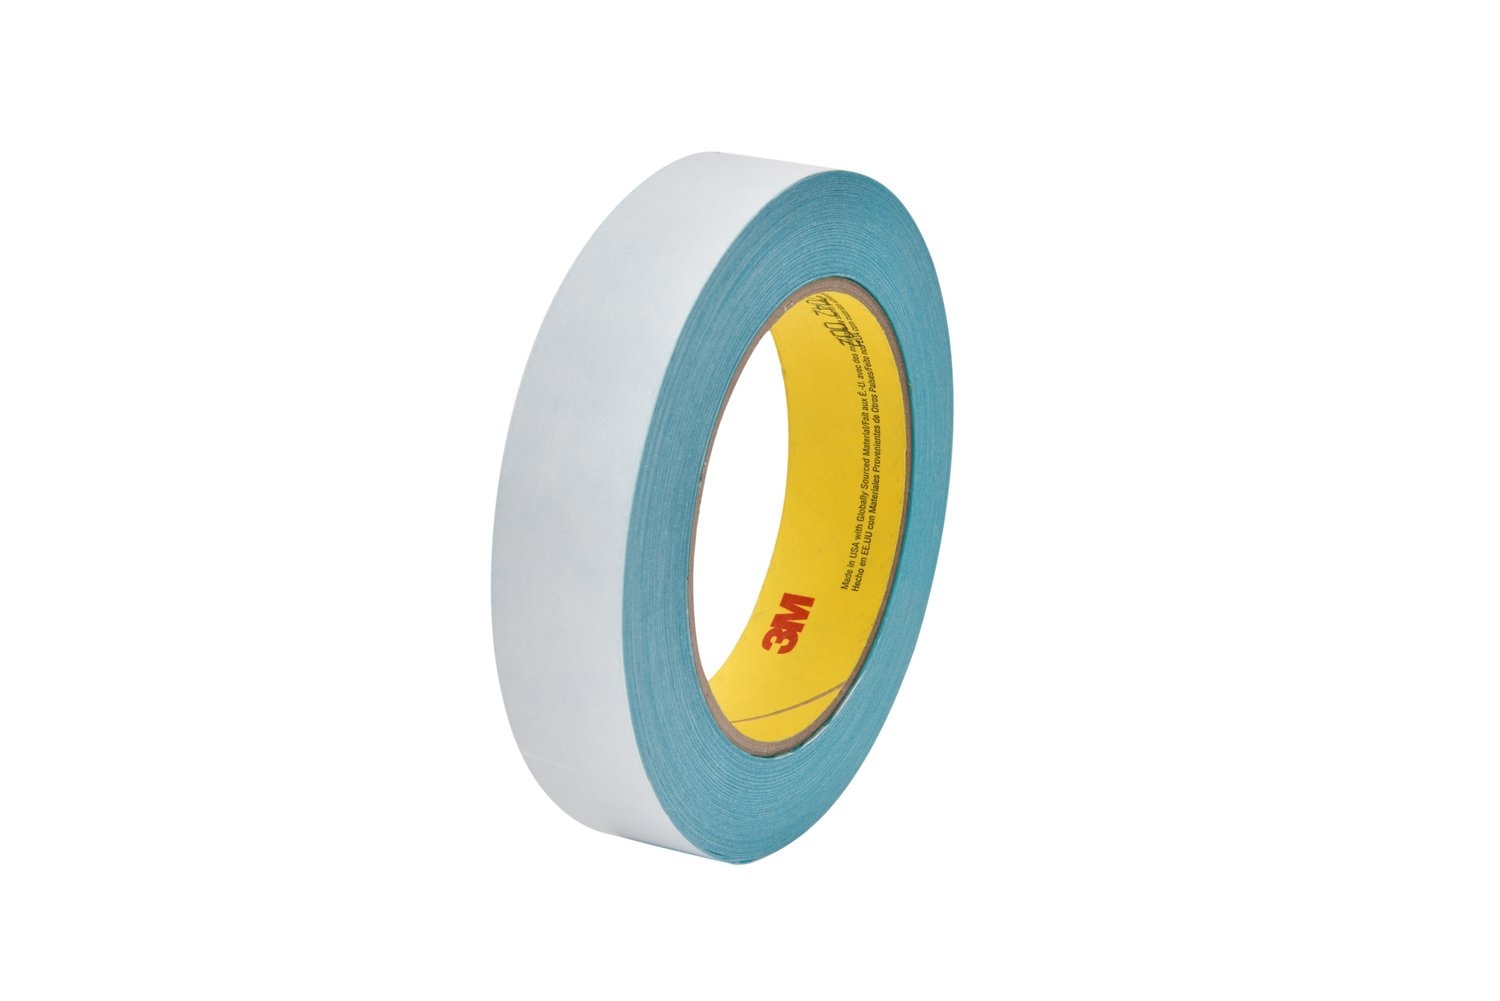 7100132863 - 3M Repulpable Double Coated Flying Splice Tape 913, Blue, 3 mil, Roll,
Config